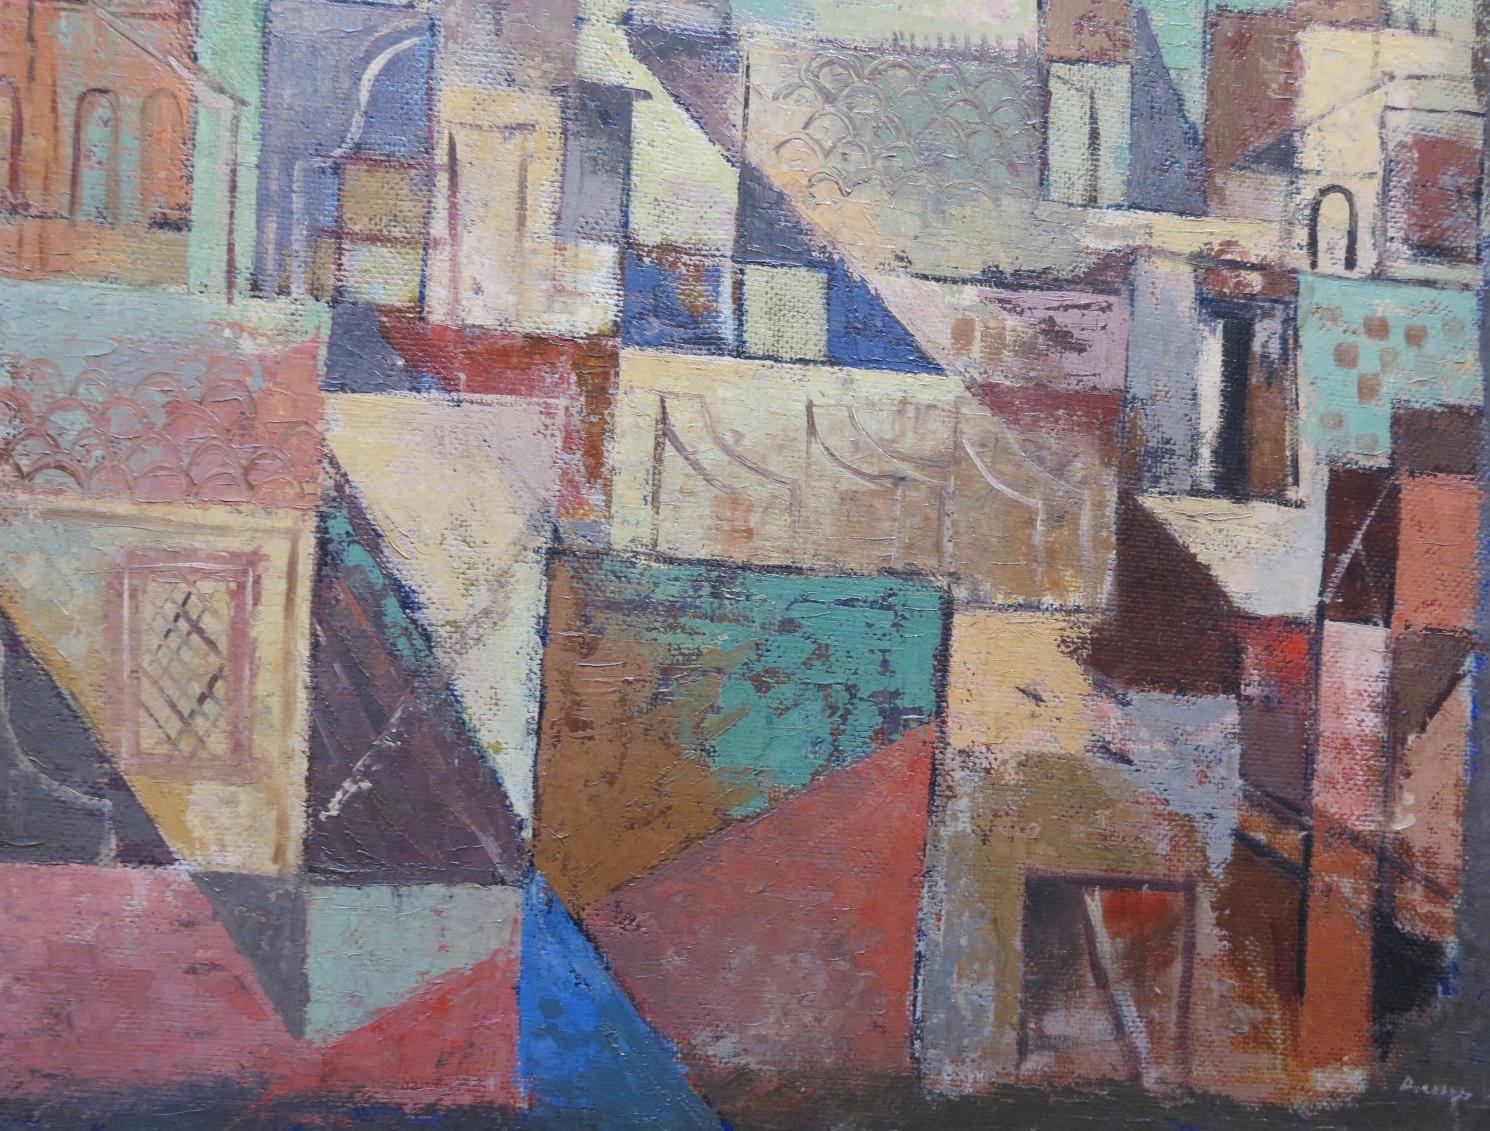 Italian City (Cubist cityscape) - Painting by Karl Drerup